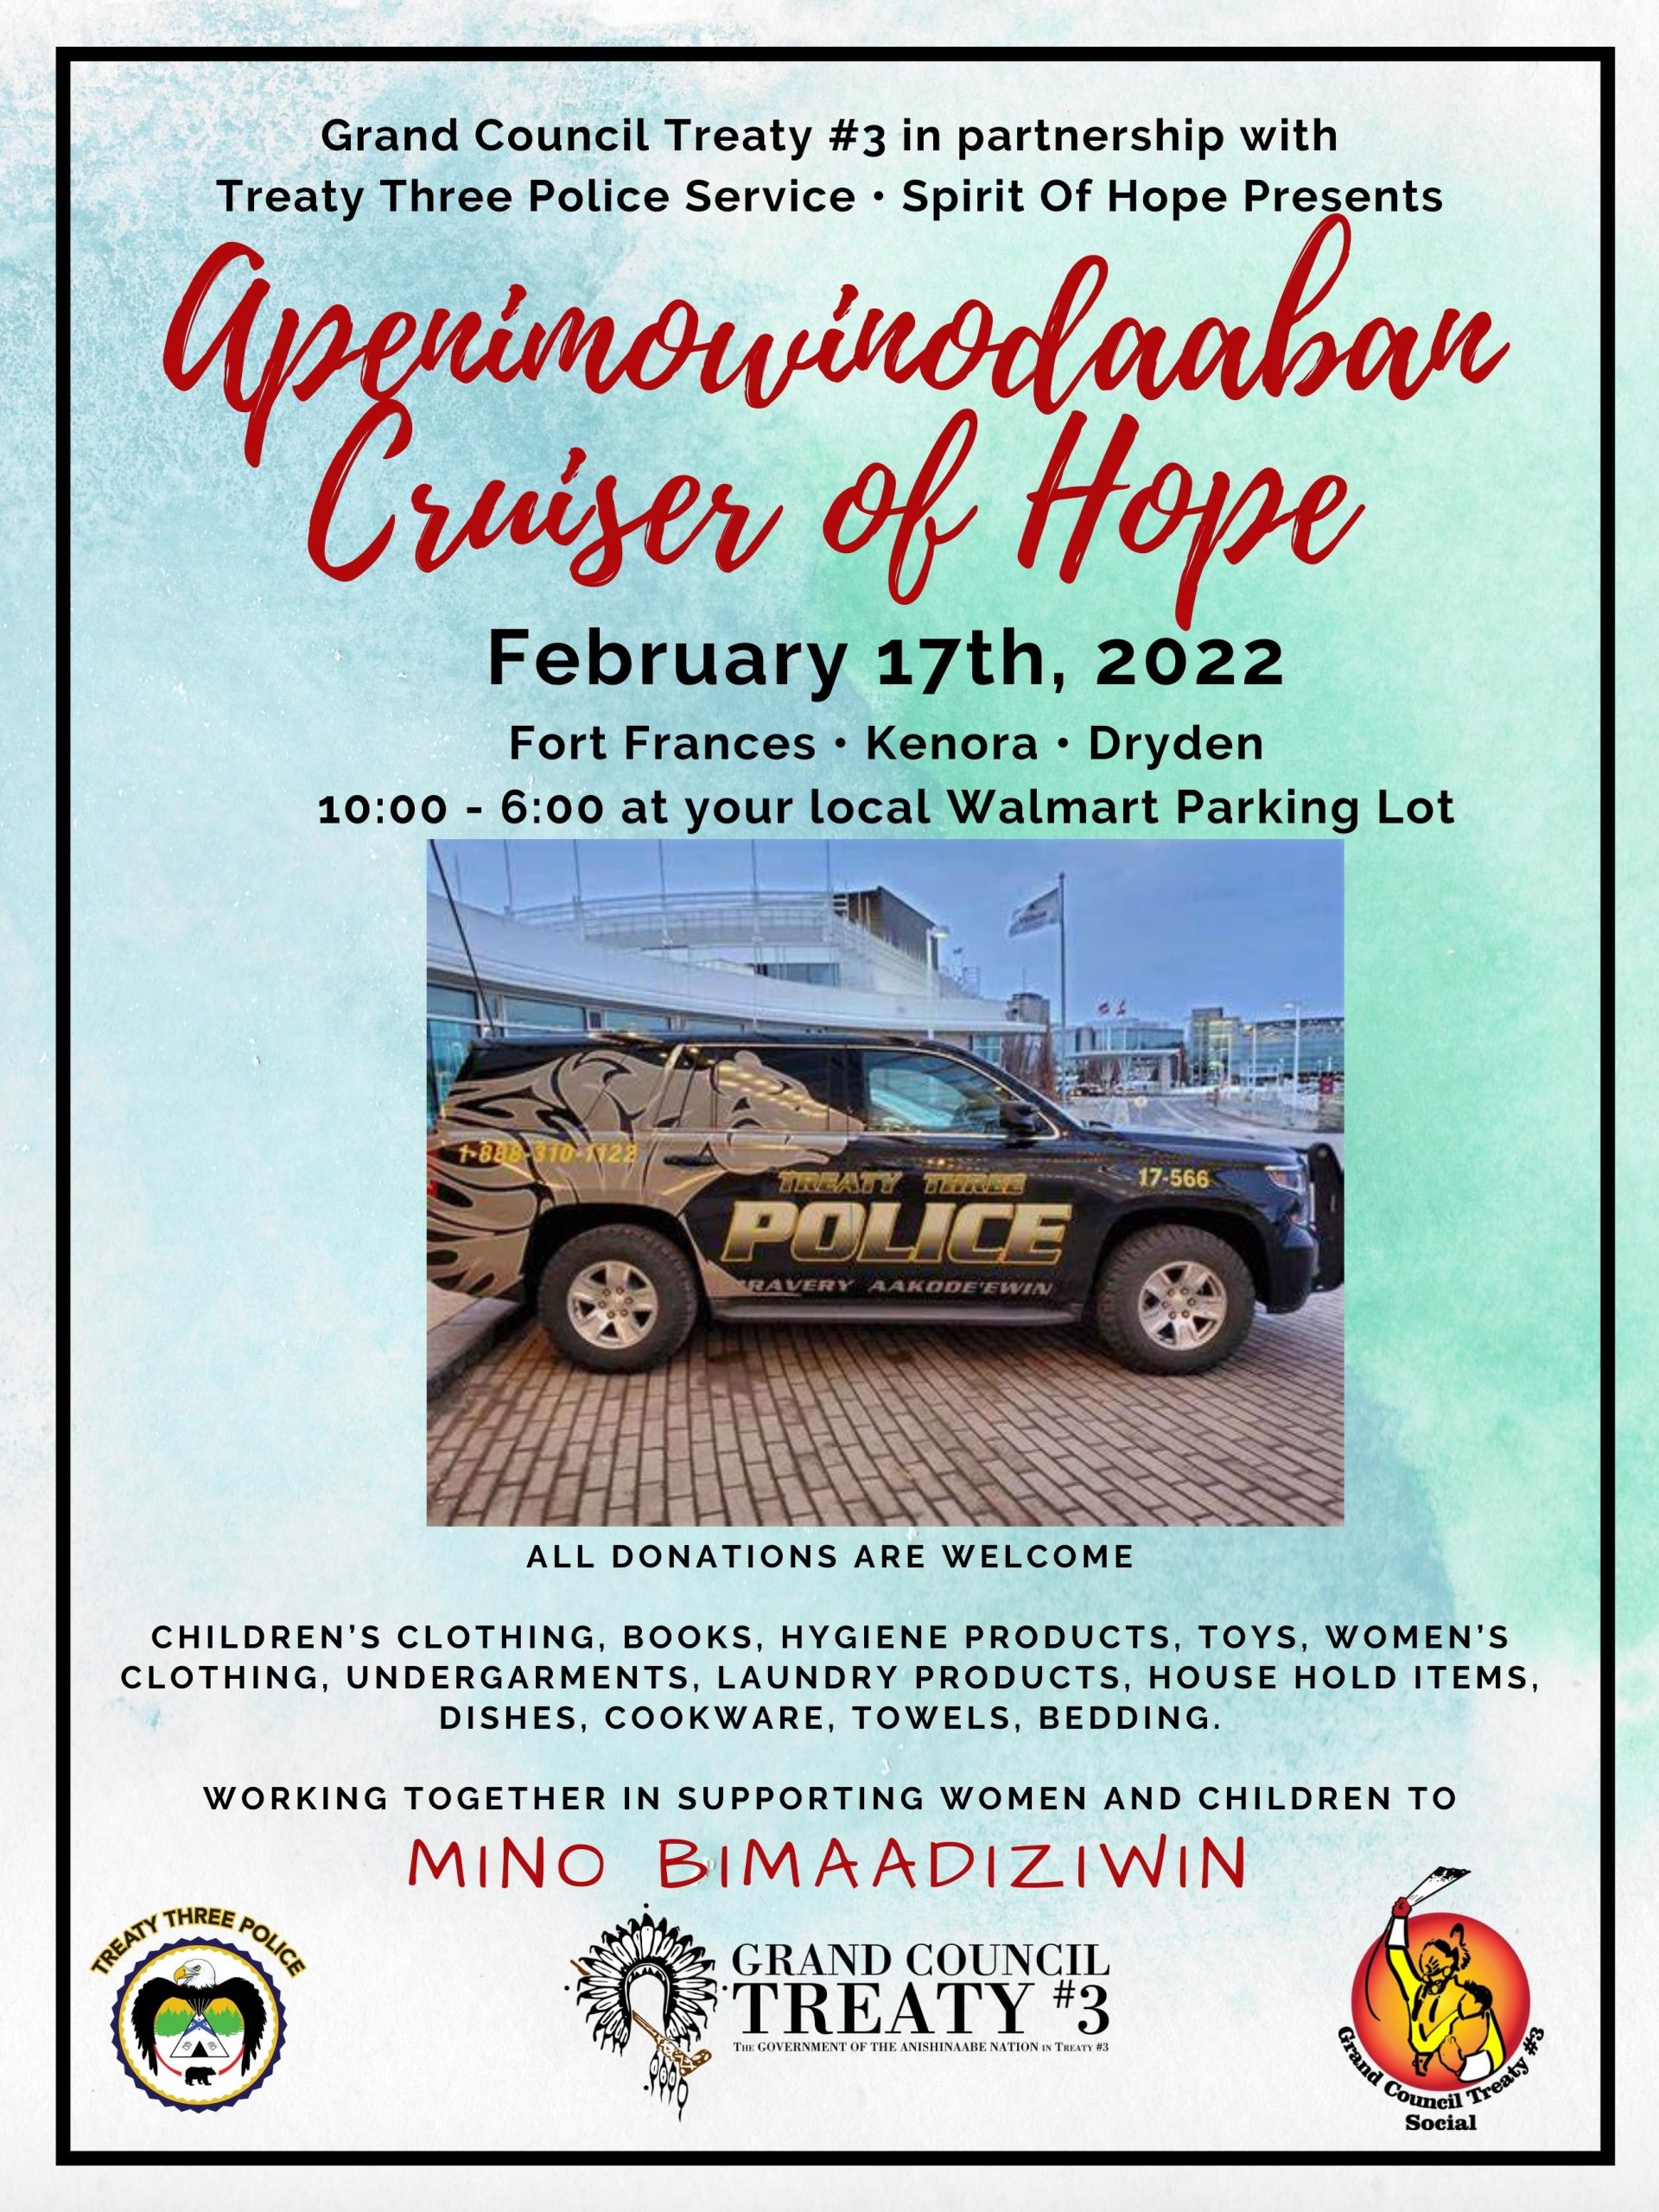 2nd Annual Cruiser of Hope Event